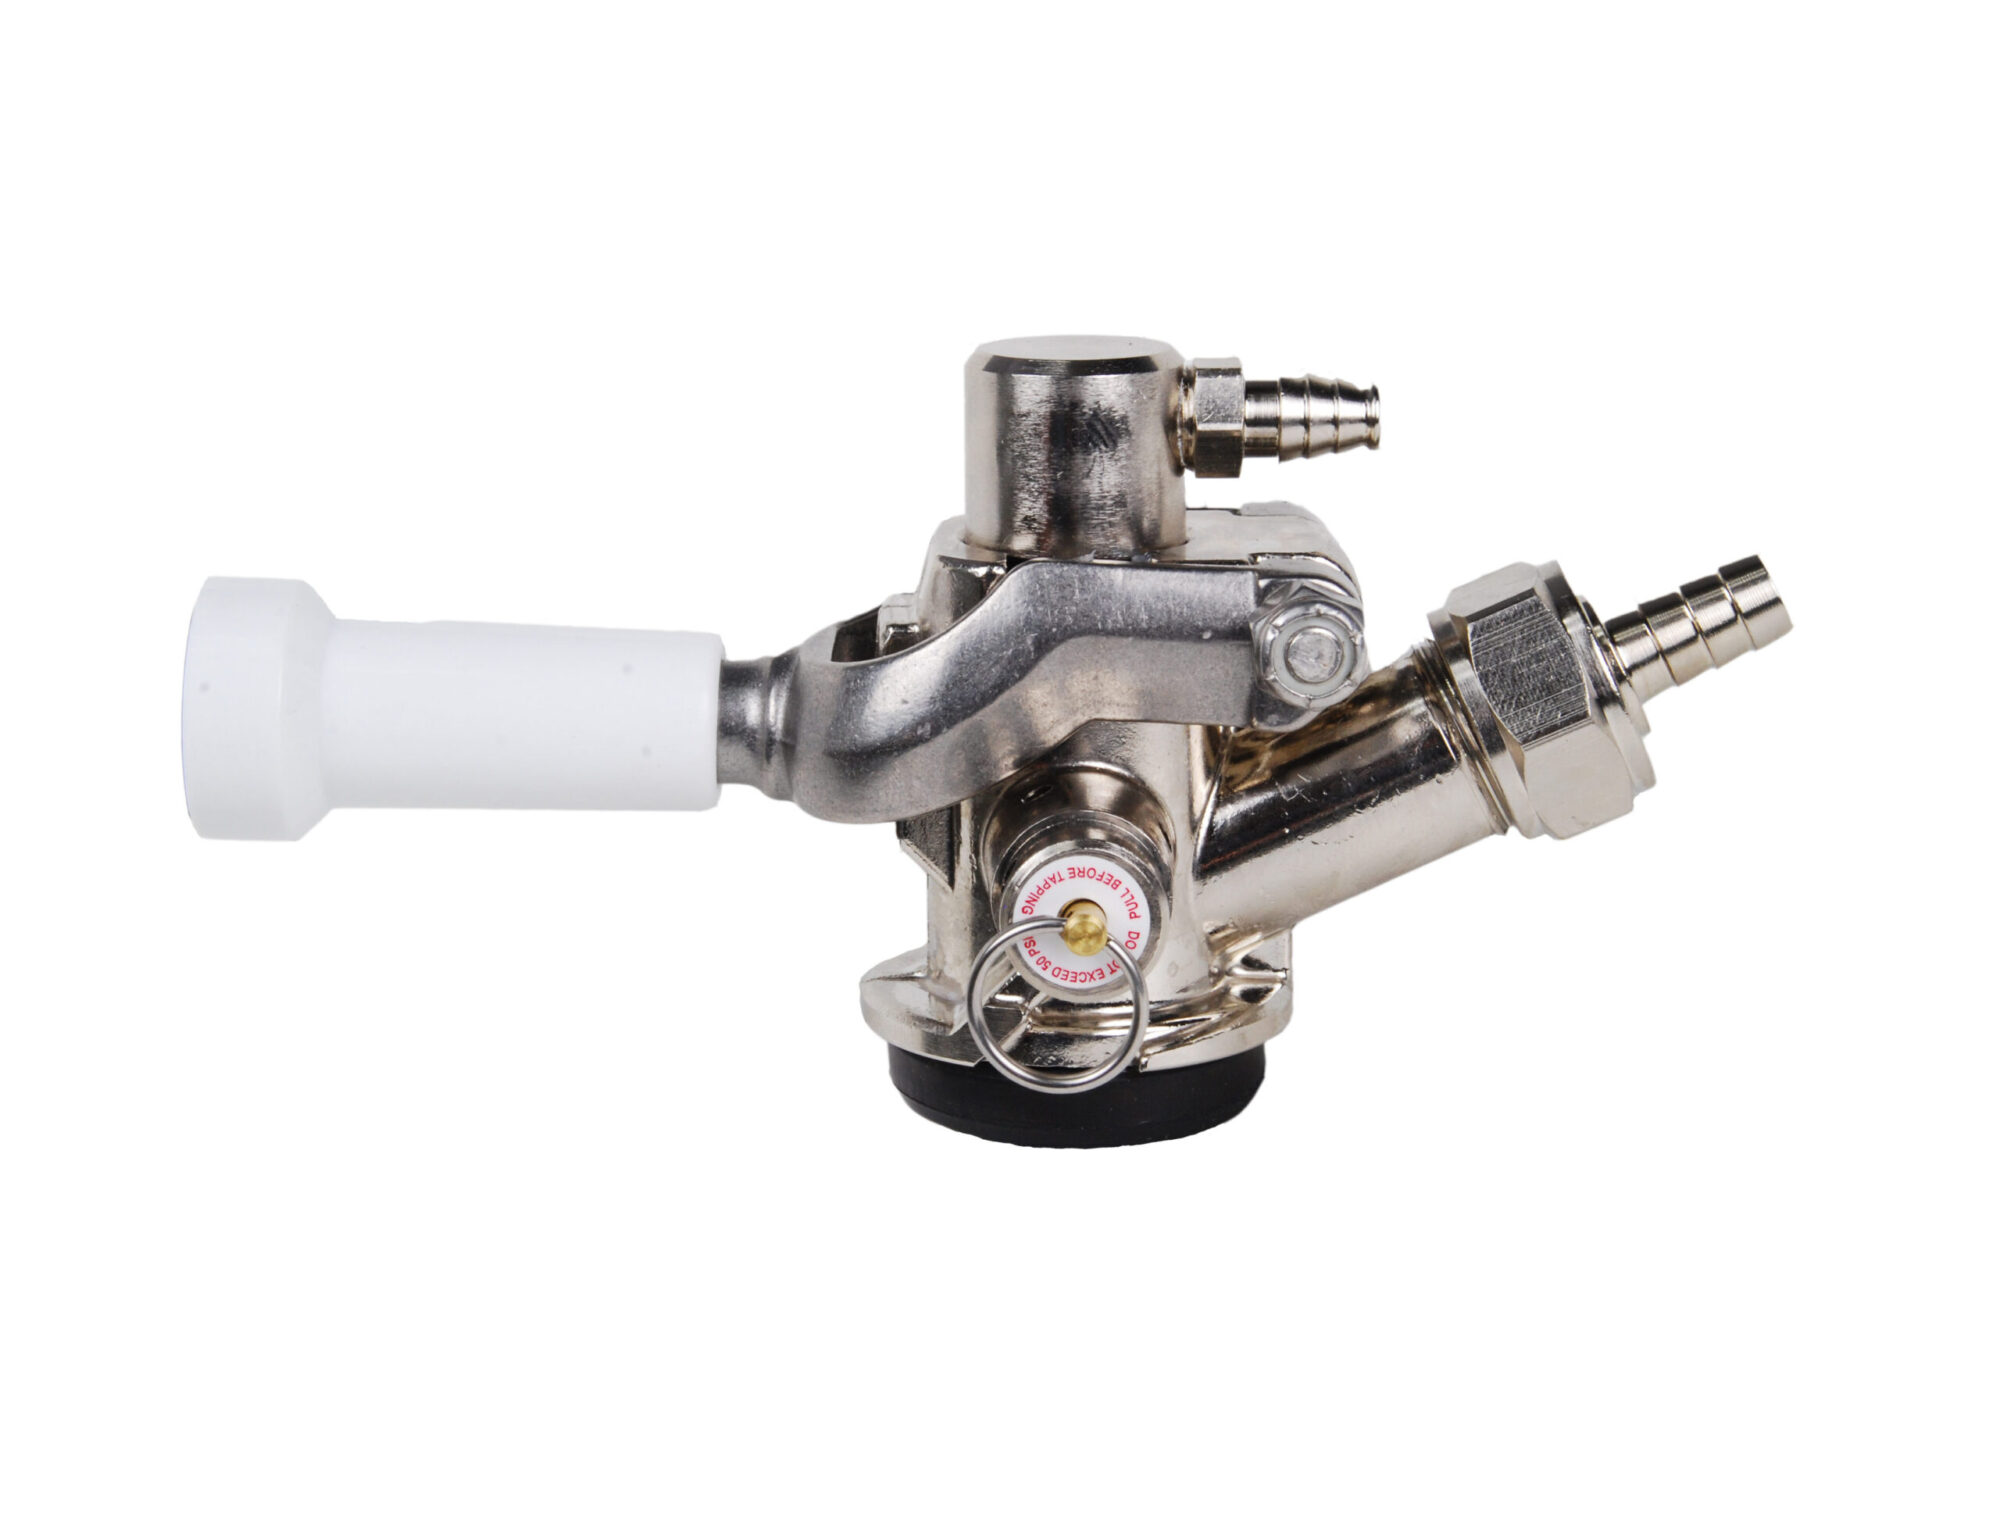 55LBH Plated Body with Plated Swivel Probe, 3/16 Barbed Nipple and White Lever Handle - Side Dispensing "D" System